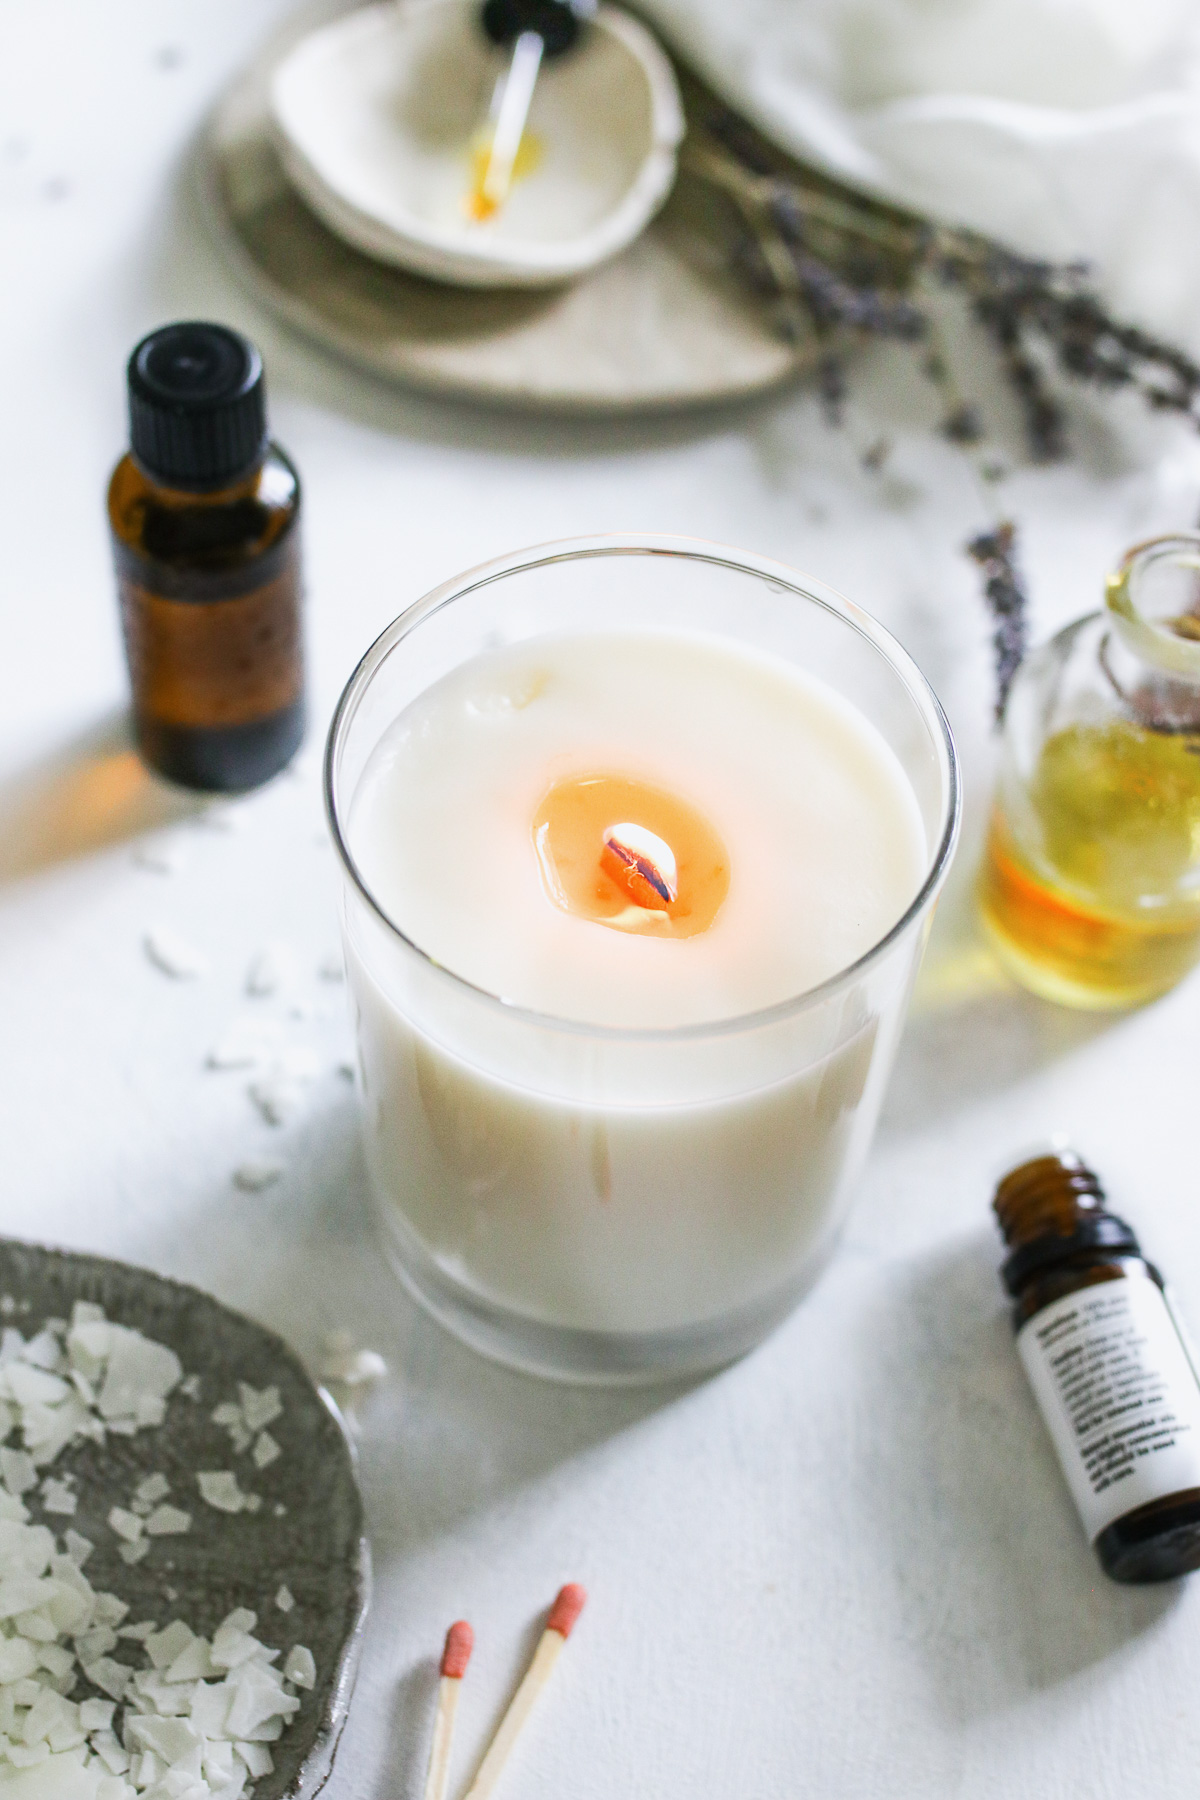 https://hellonest.co/wp-content/uploads/2020/08/Guide-to-Essential-Oil-Candles-8.jpg